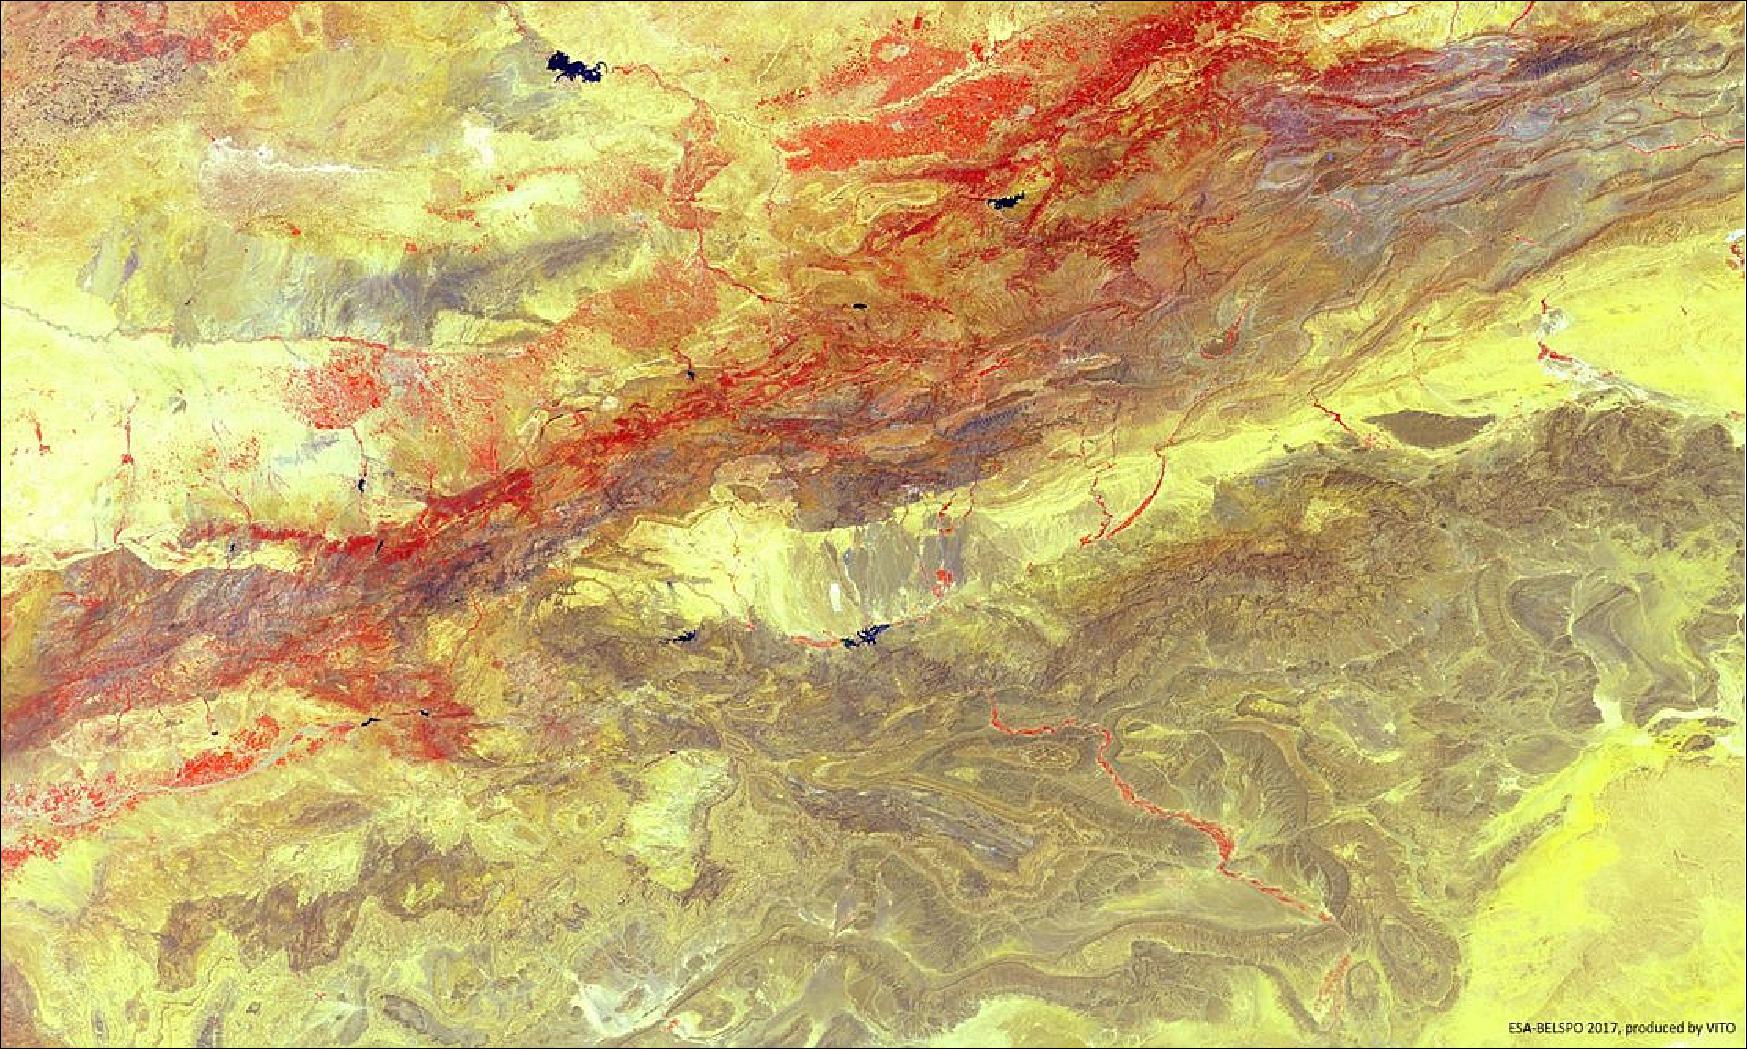 Figure 35: In the summer of 2017, ESA's PROBA-V minisatellite surveyed North Africa's Atlas mountains, bordering the Sahara (image credit: ESA/Belspo – produced by VITO)